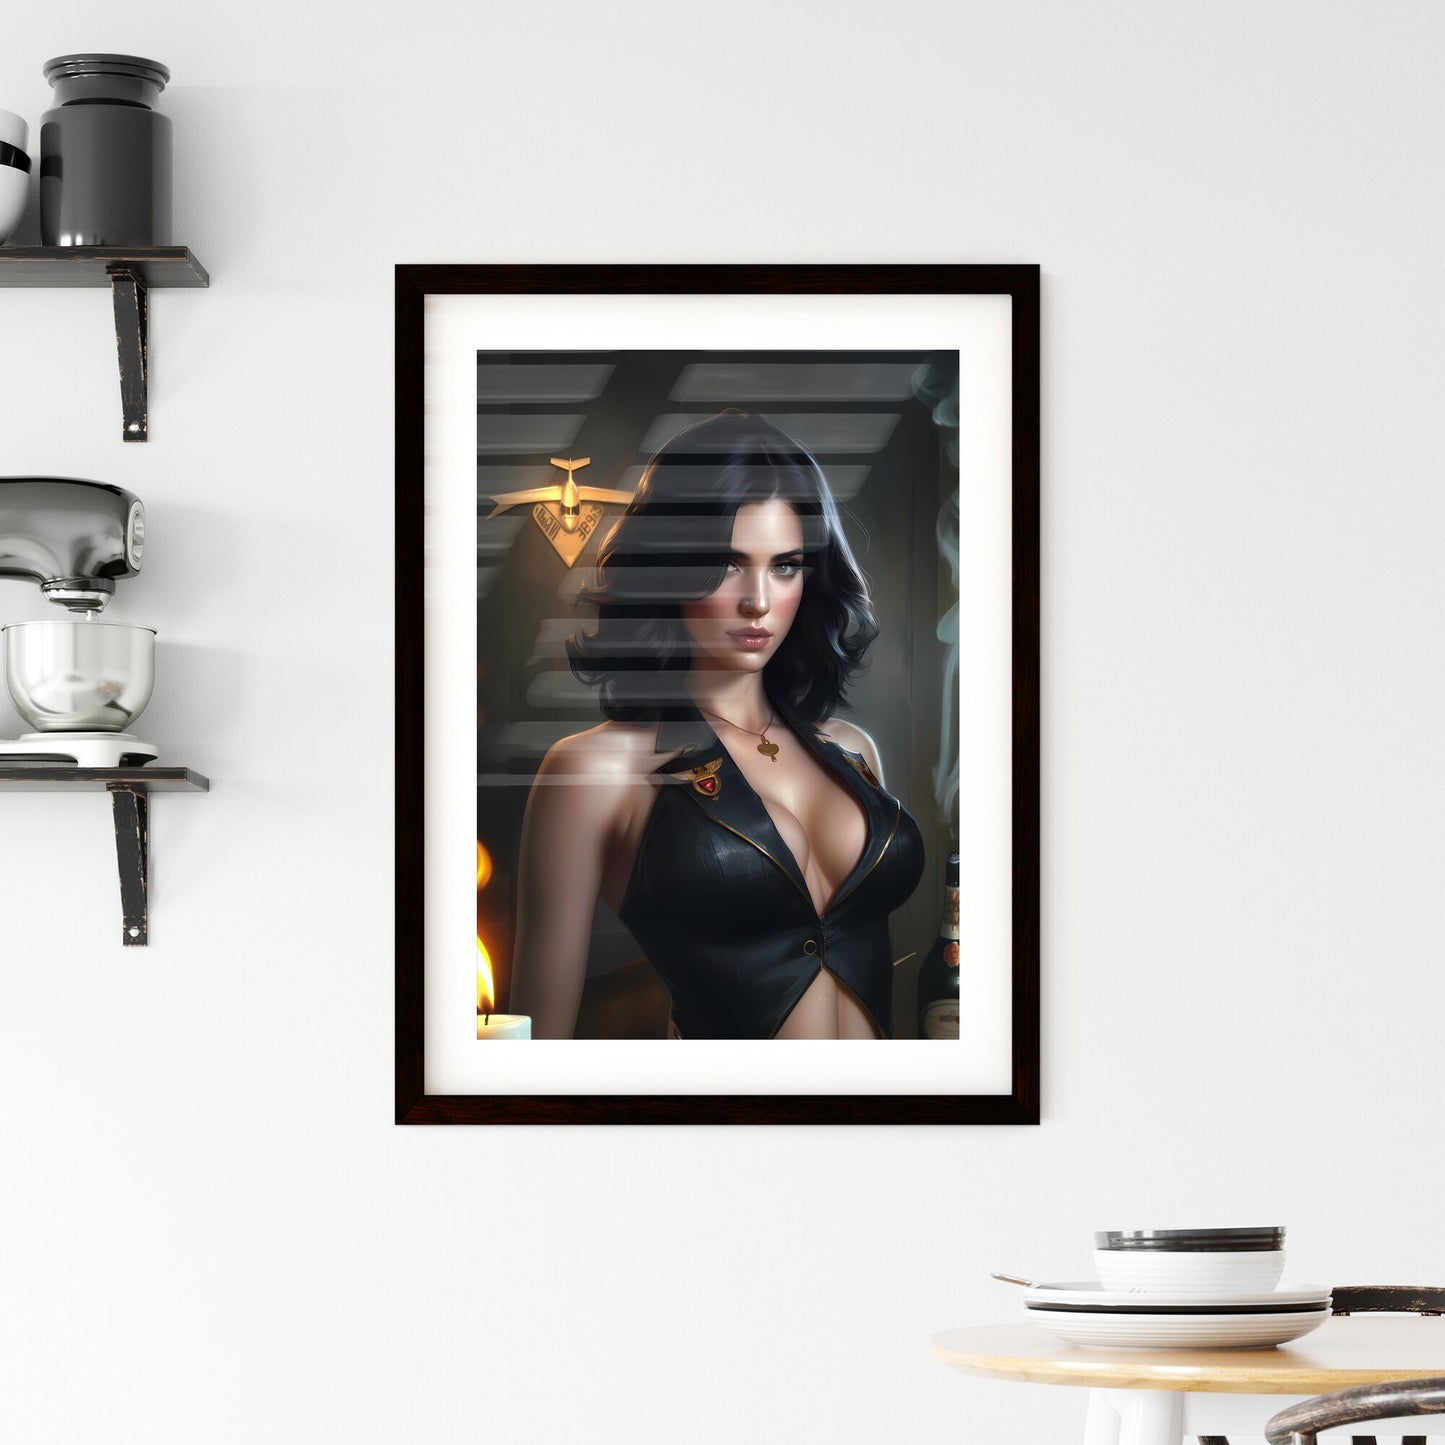 Girl, pin up poster, in the style of hyperrealistic illustrations, glamorous pin-ups, camel cigs, vintage, retro - Art print of a woman in a leather vest Default Title